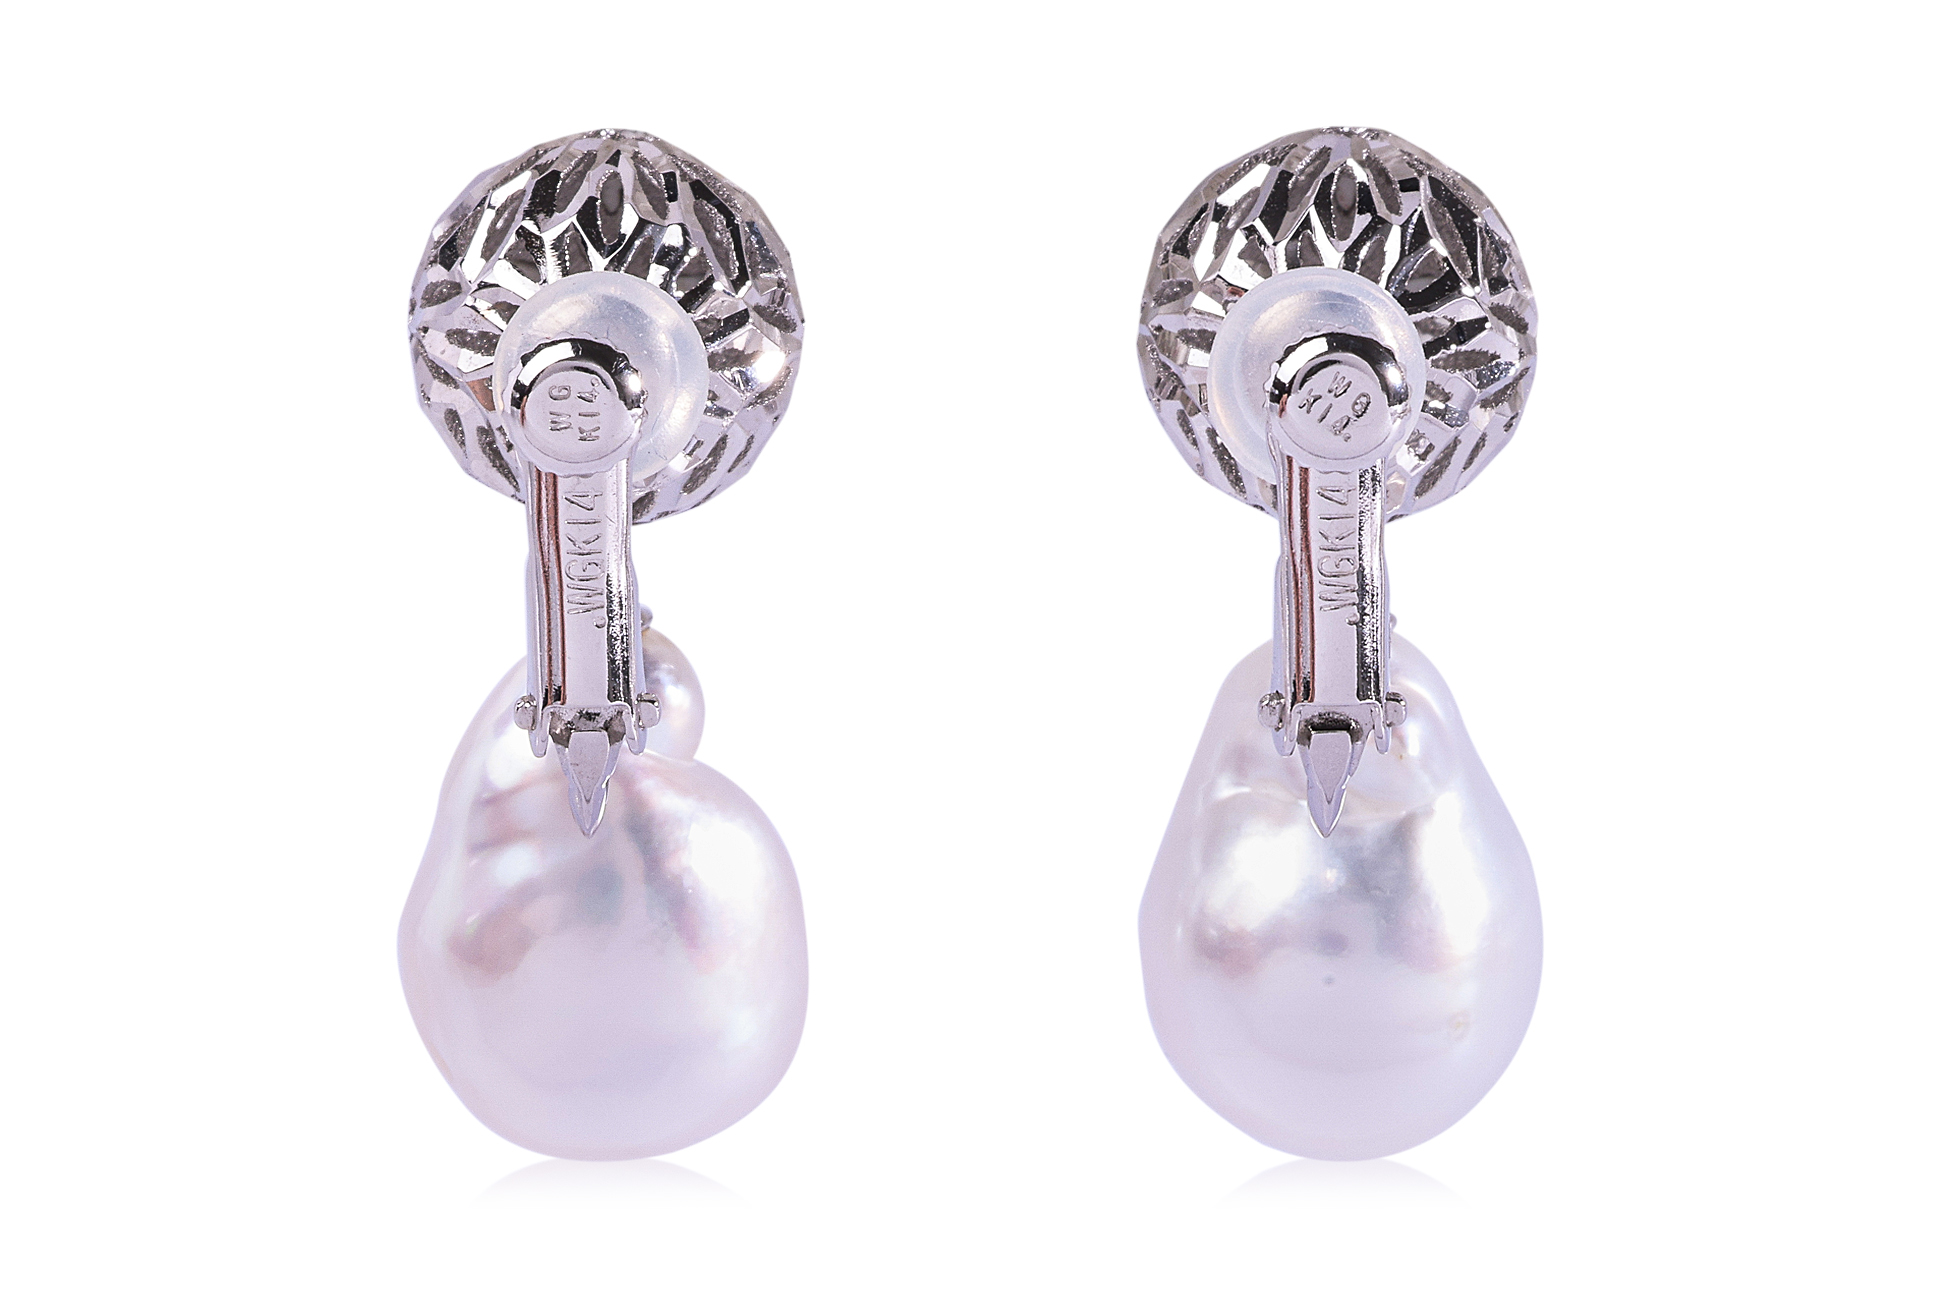 A PAIR OF LATTICE BALL AND CULTURED BAROQUE PEARL EARRINGS - Image 3 of 3